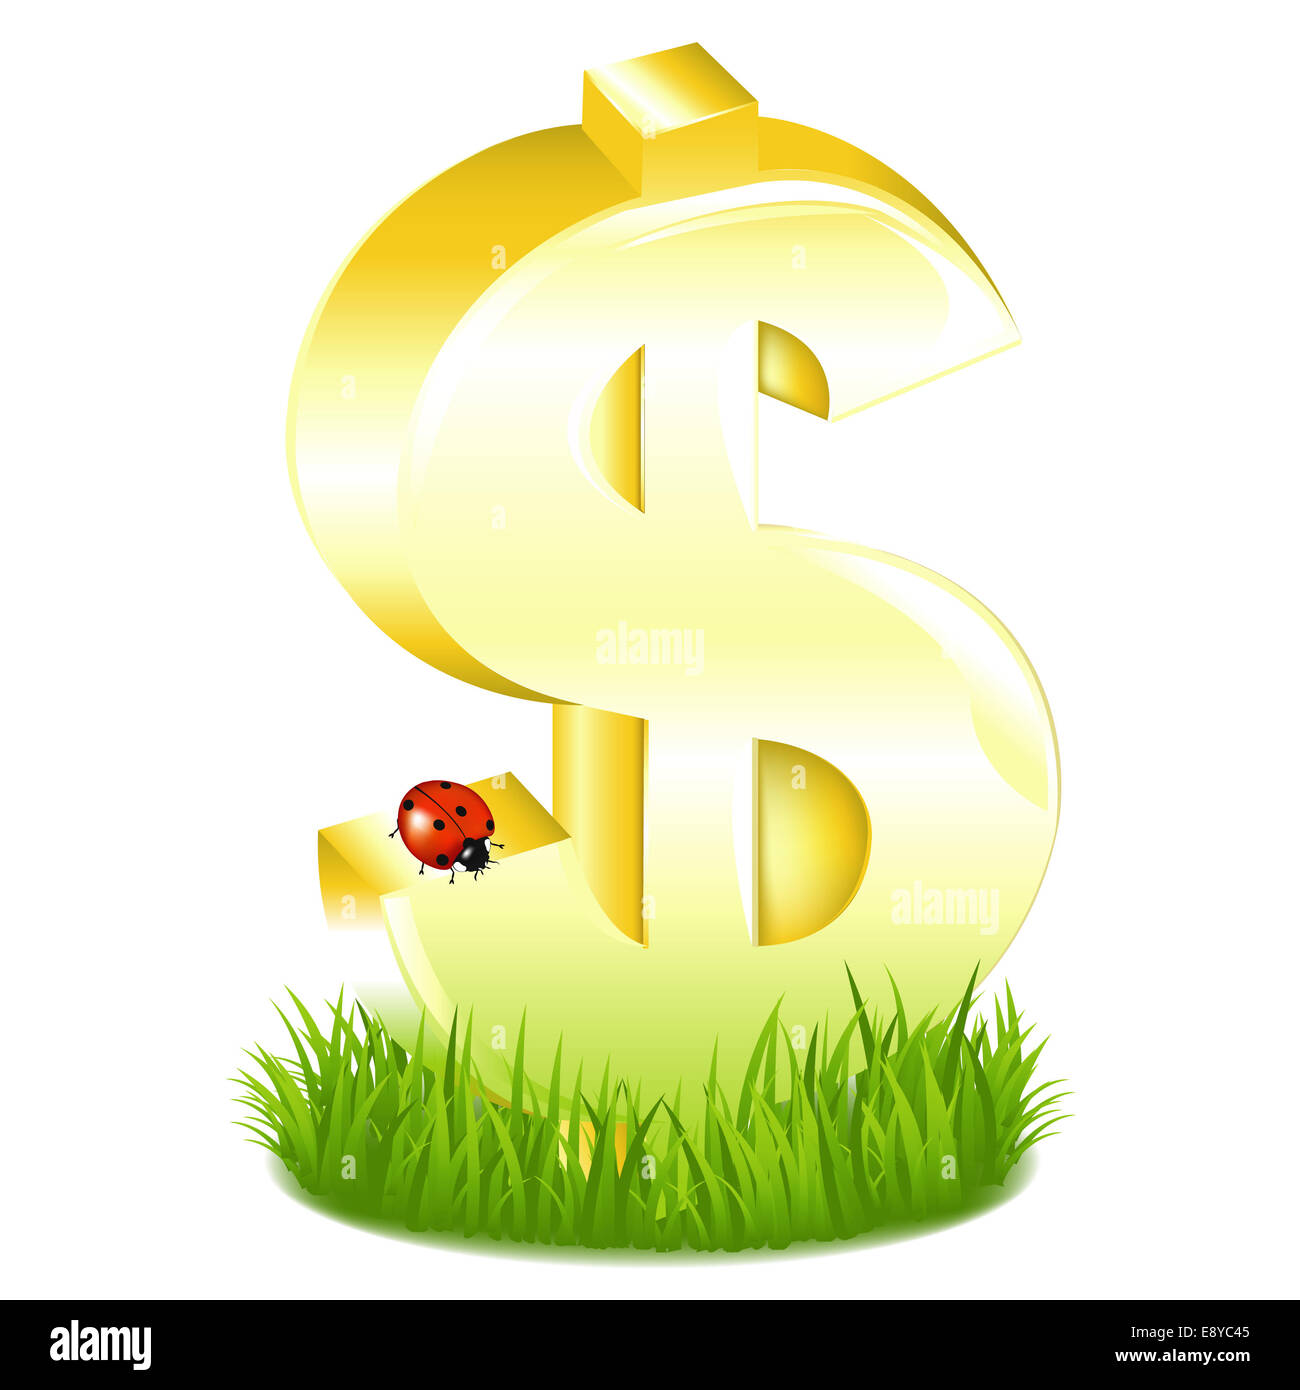 Golden Dollar Sign In Grass With Ladybug Stock Photo